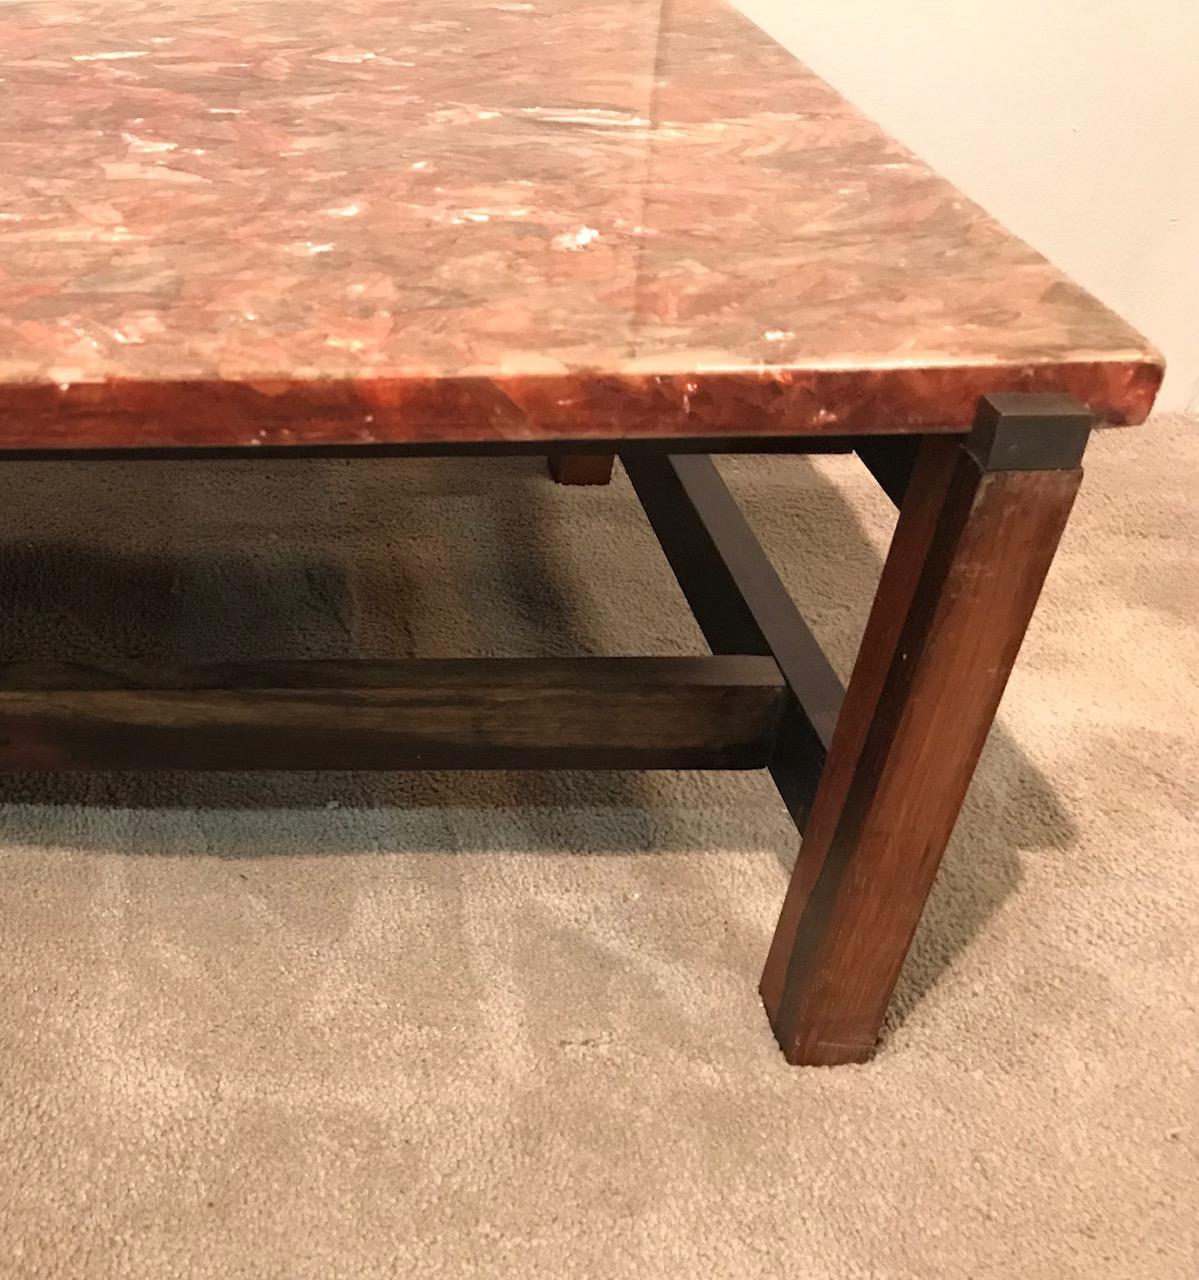 1970s French Rosewood and Resin Coffee Table (20. Jahrhundert) im Angebot